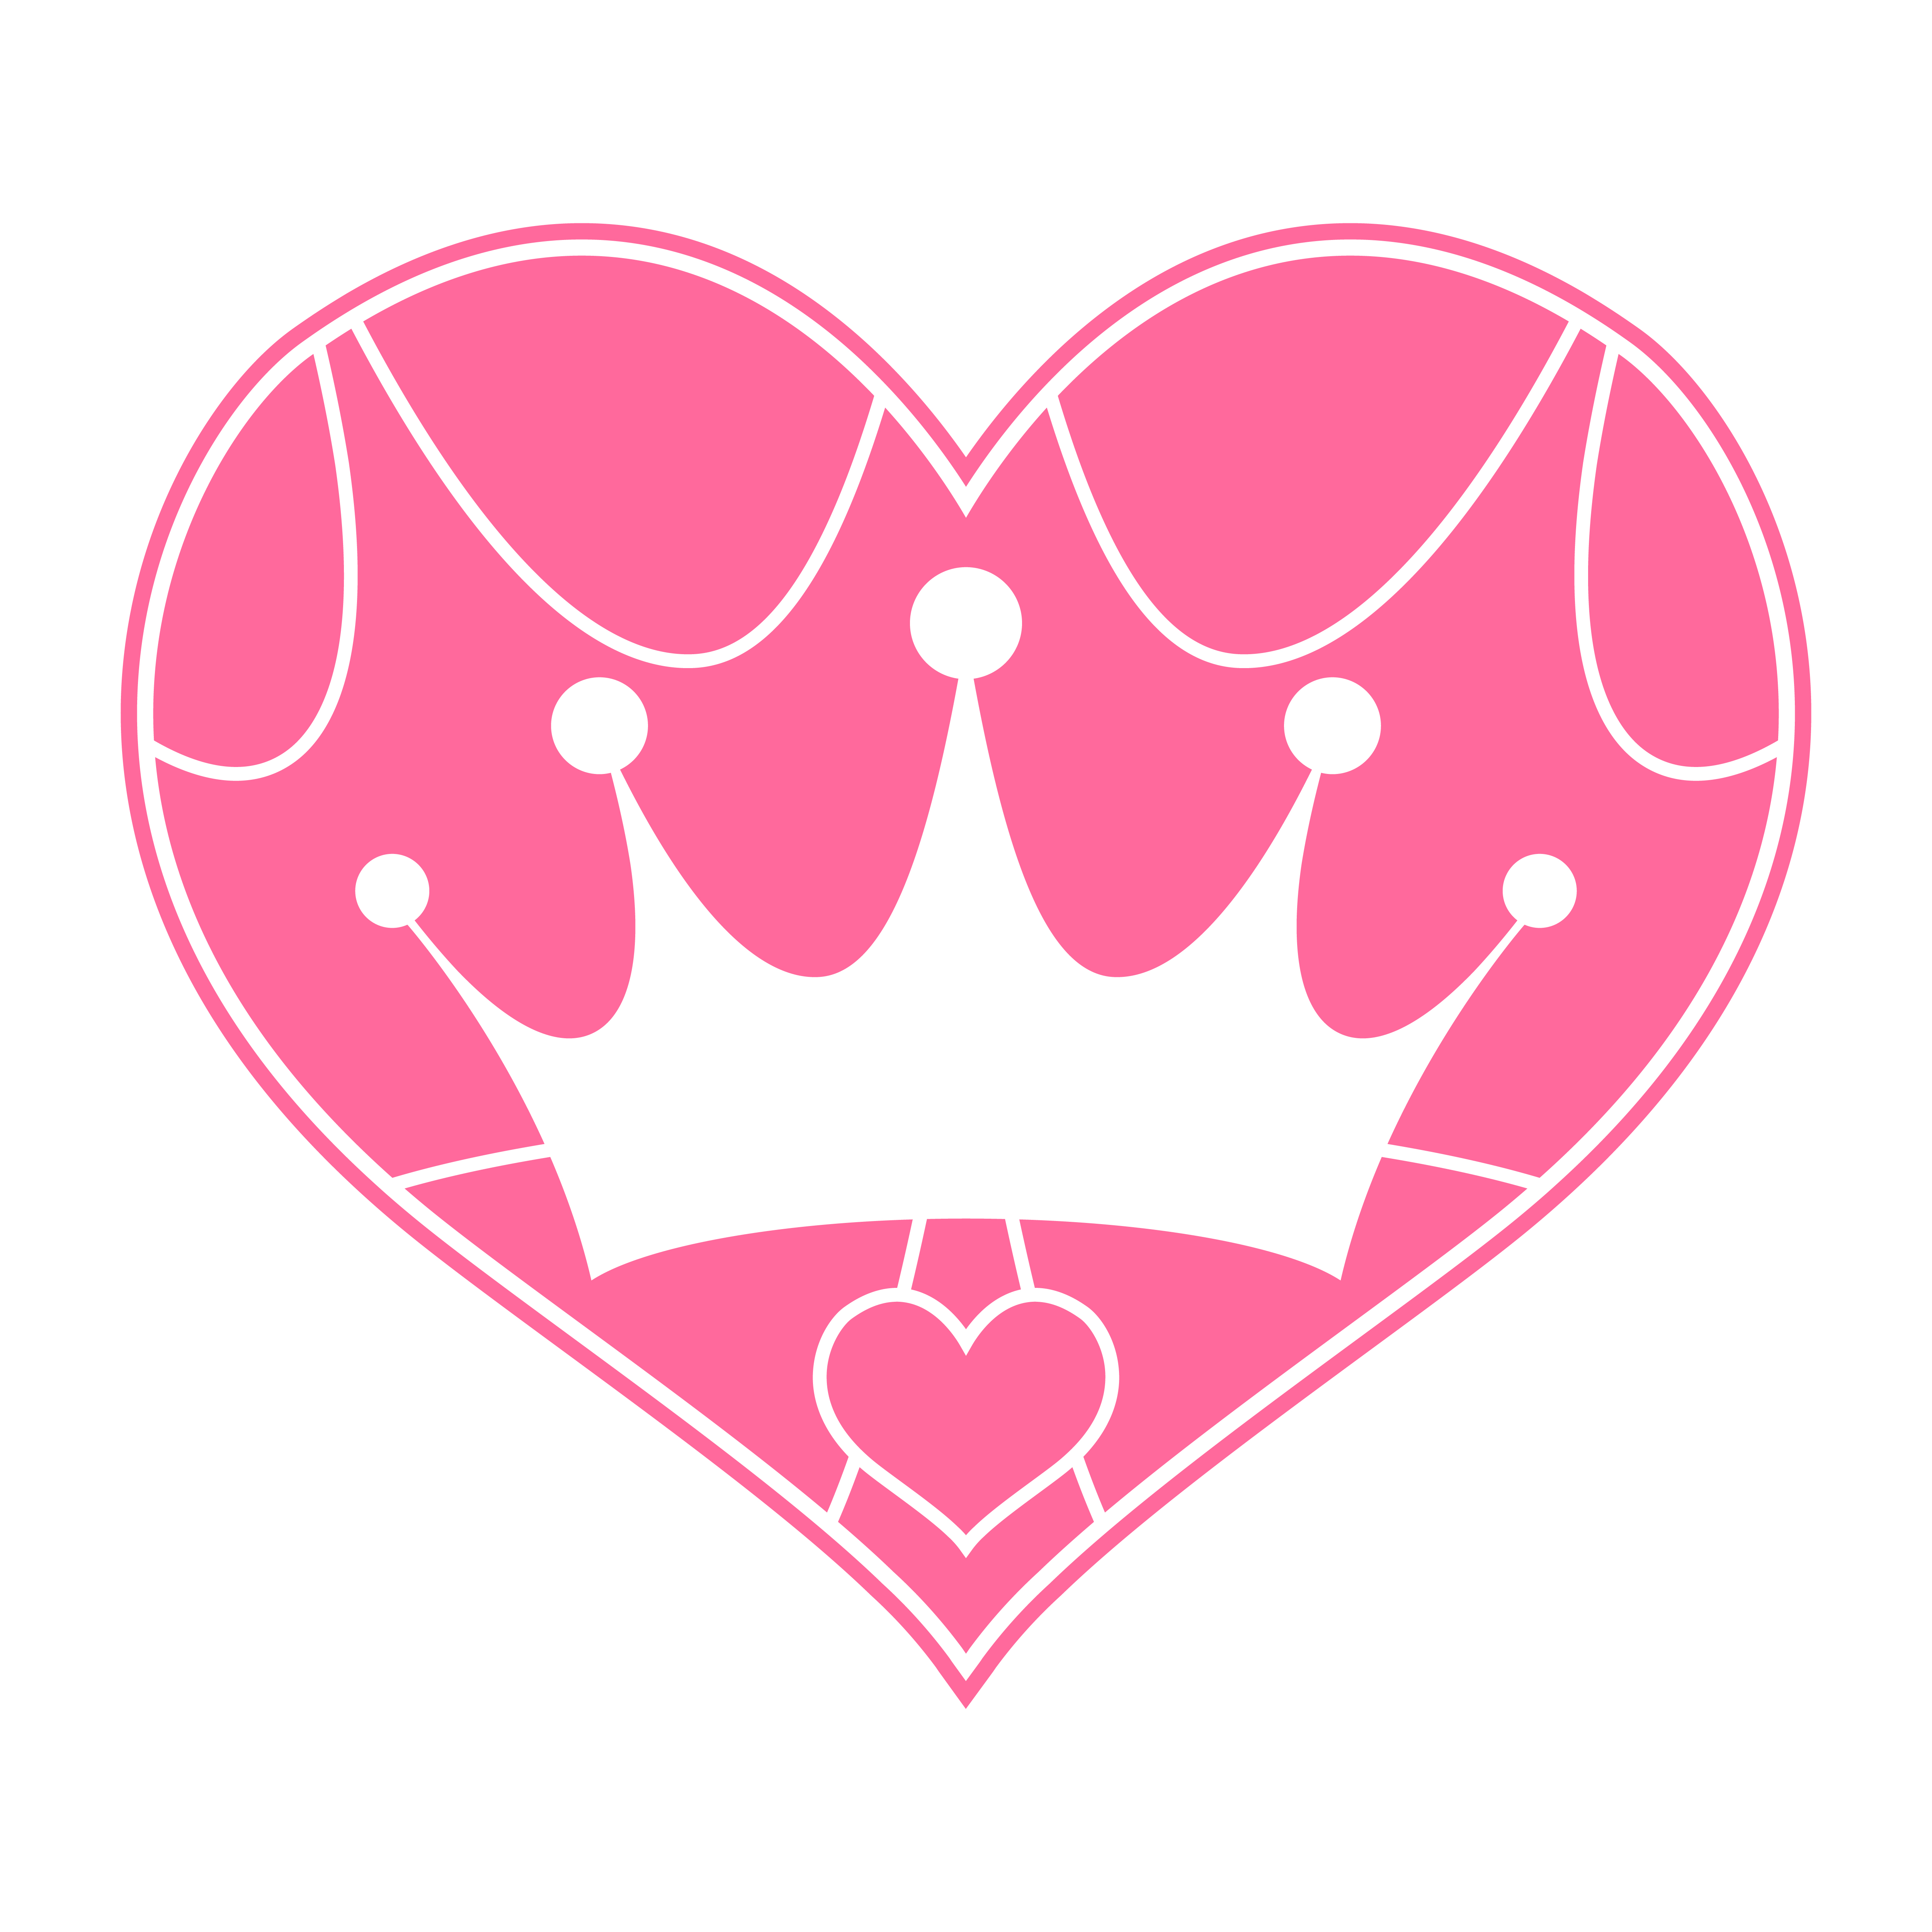 Download Pink Girly Princess Royalty Crown With Heart Jewels ...